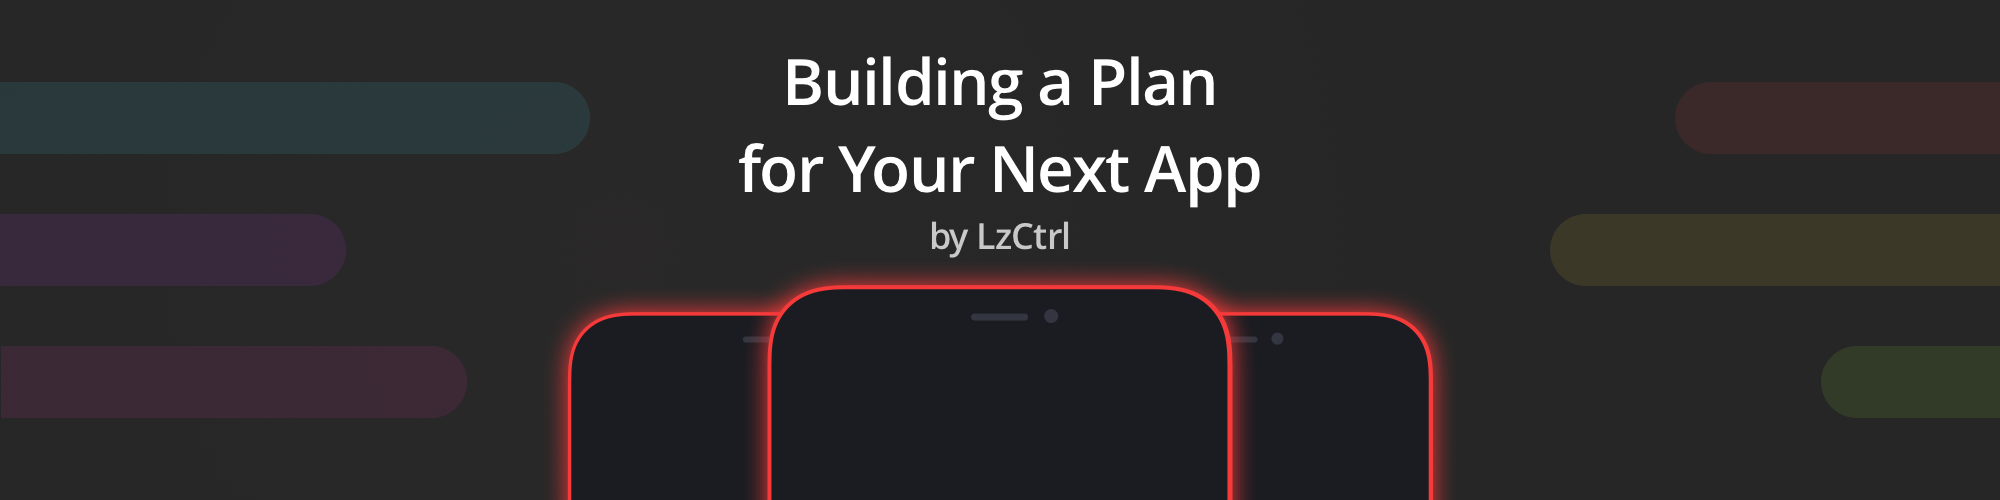 Building a Plan for Your Next App